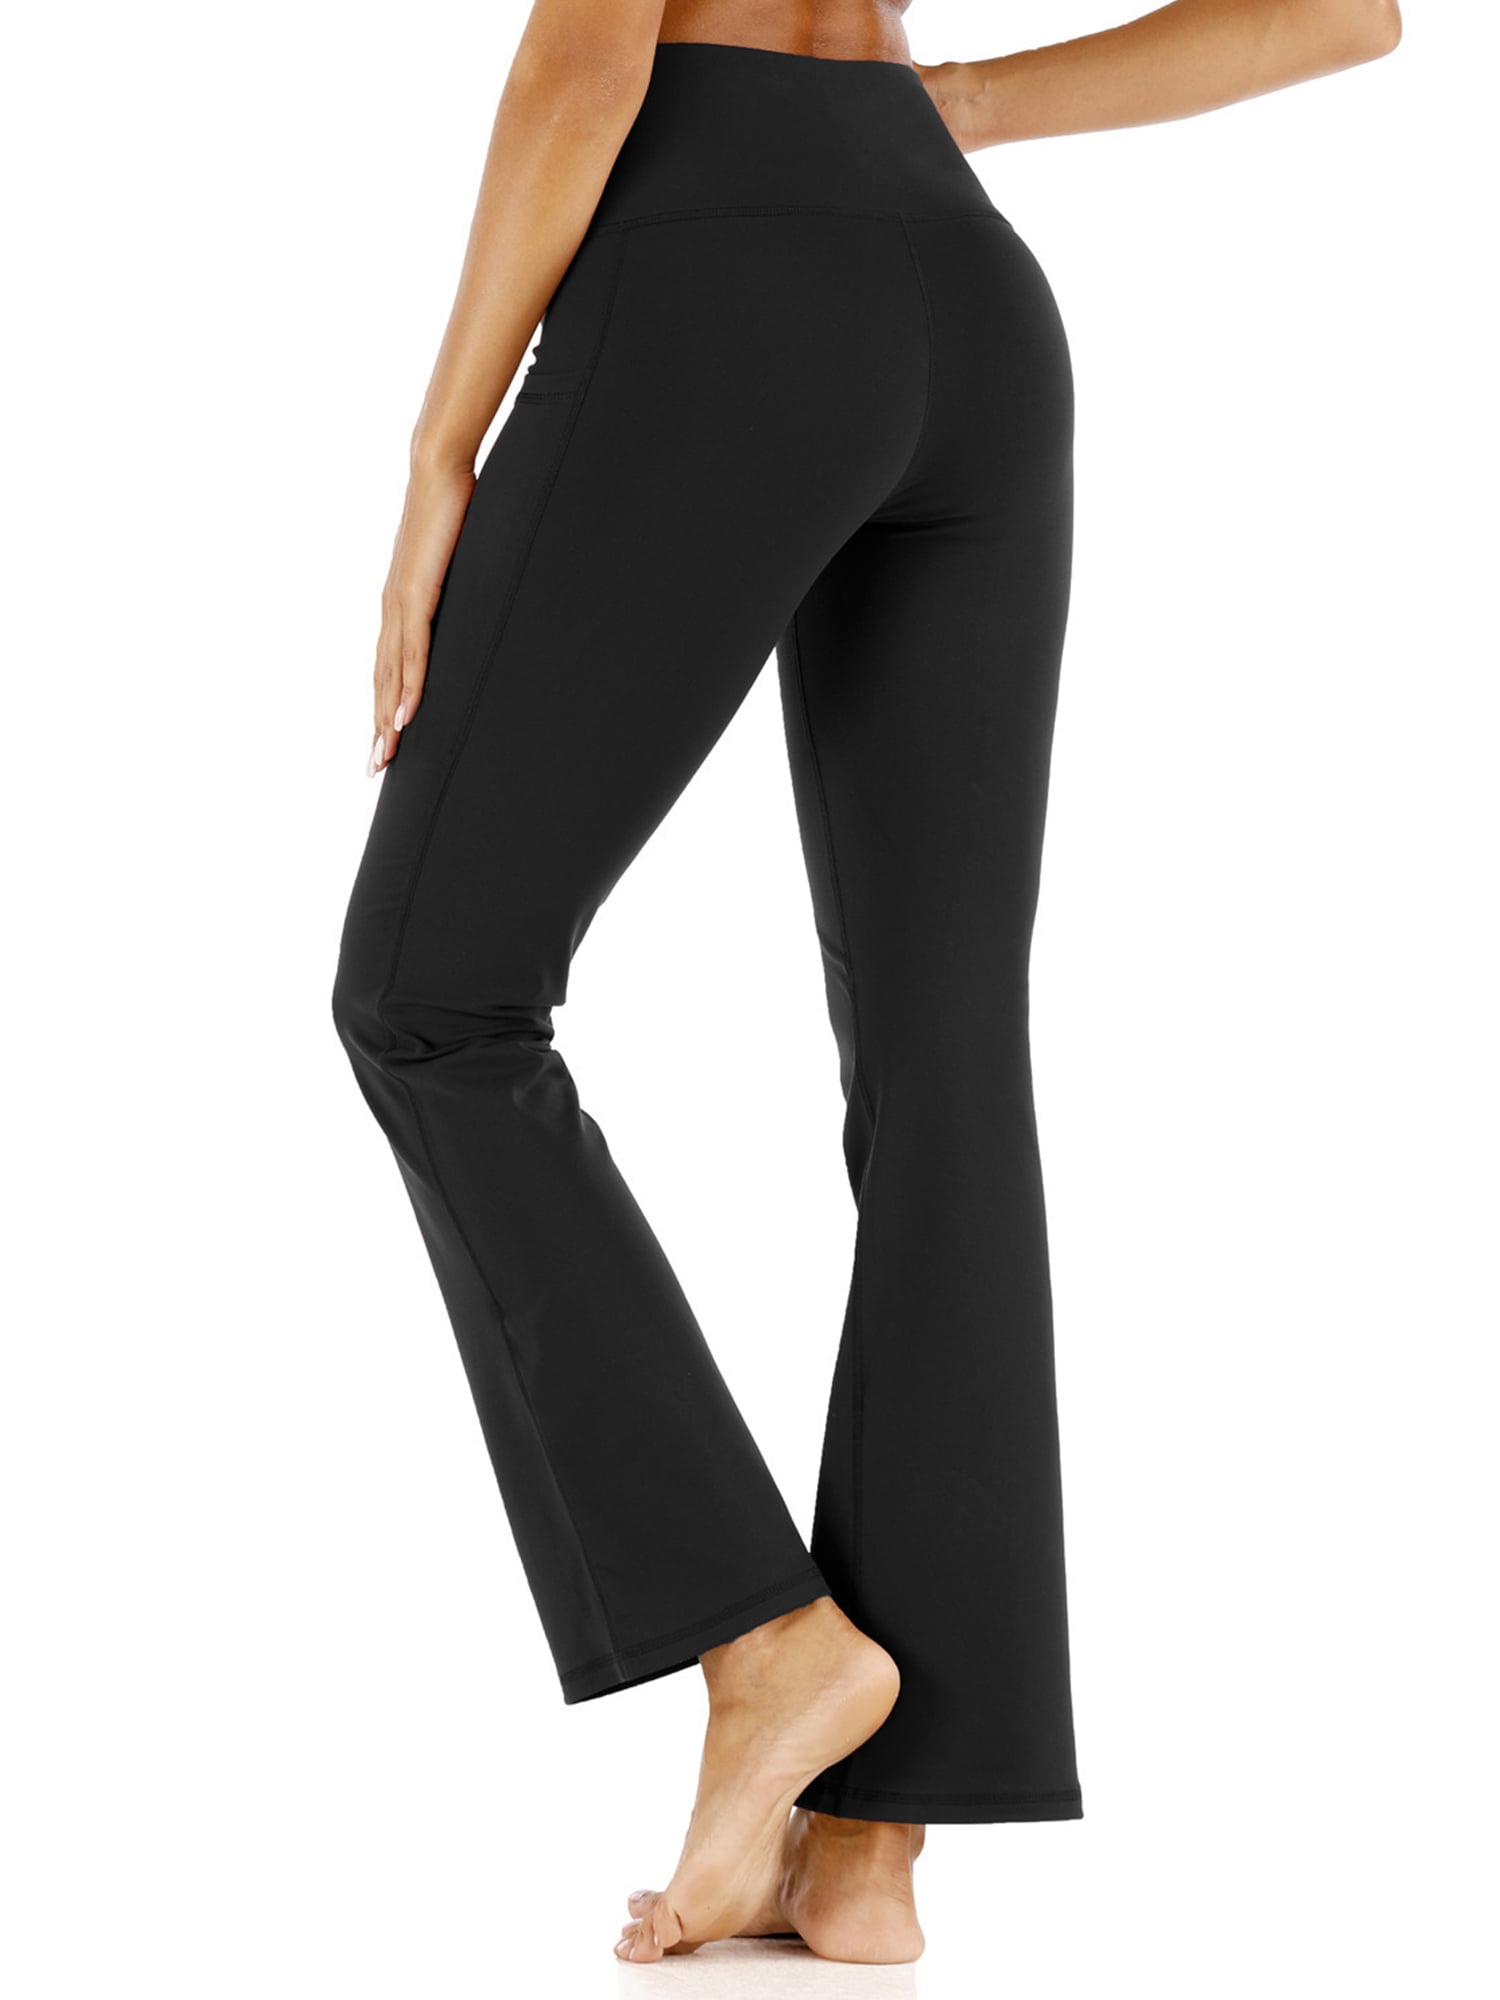 2 Pack Yoga Pants for Women Bootcut Flare Leggings High Waisted Lounge Workout  Pants Solid Color Wide Leg Trousers with Pocket 